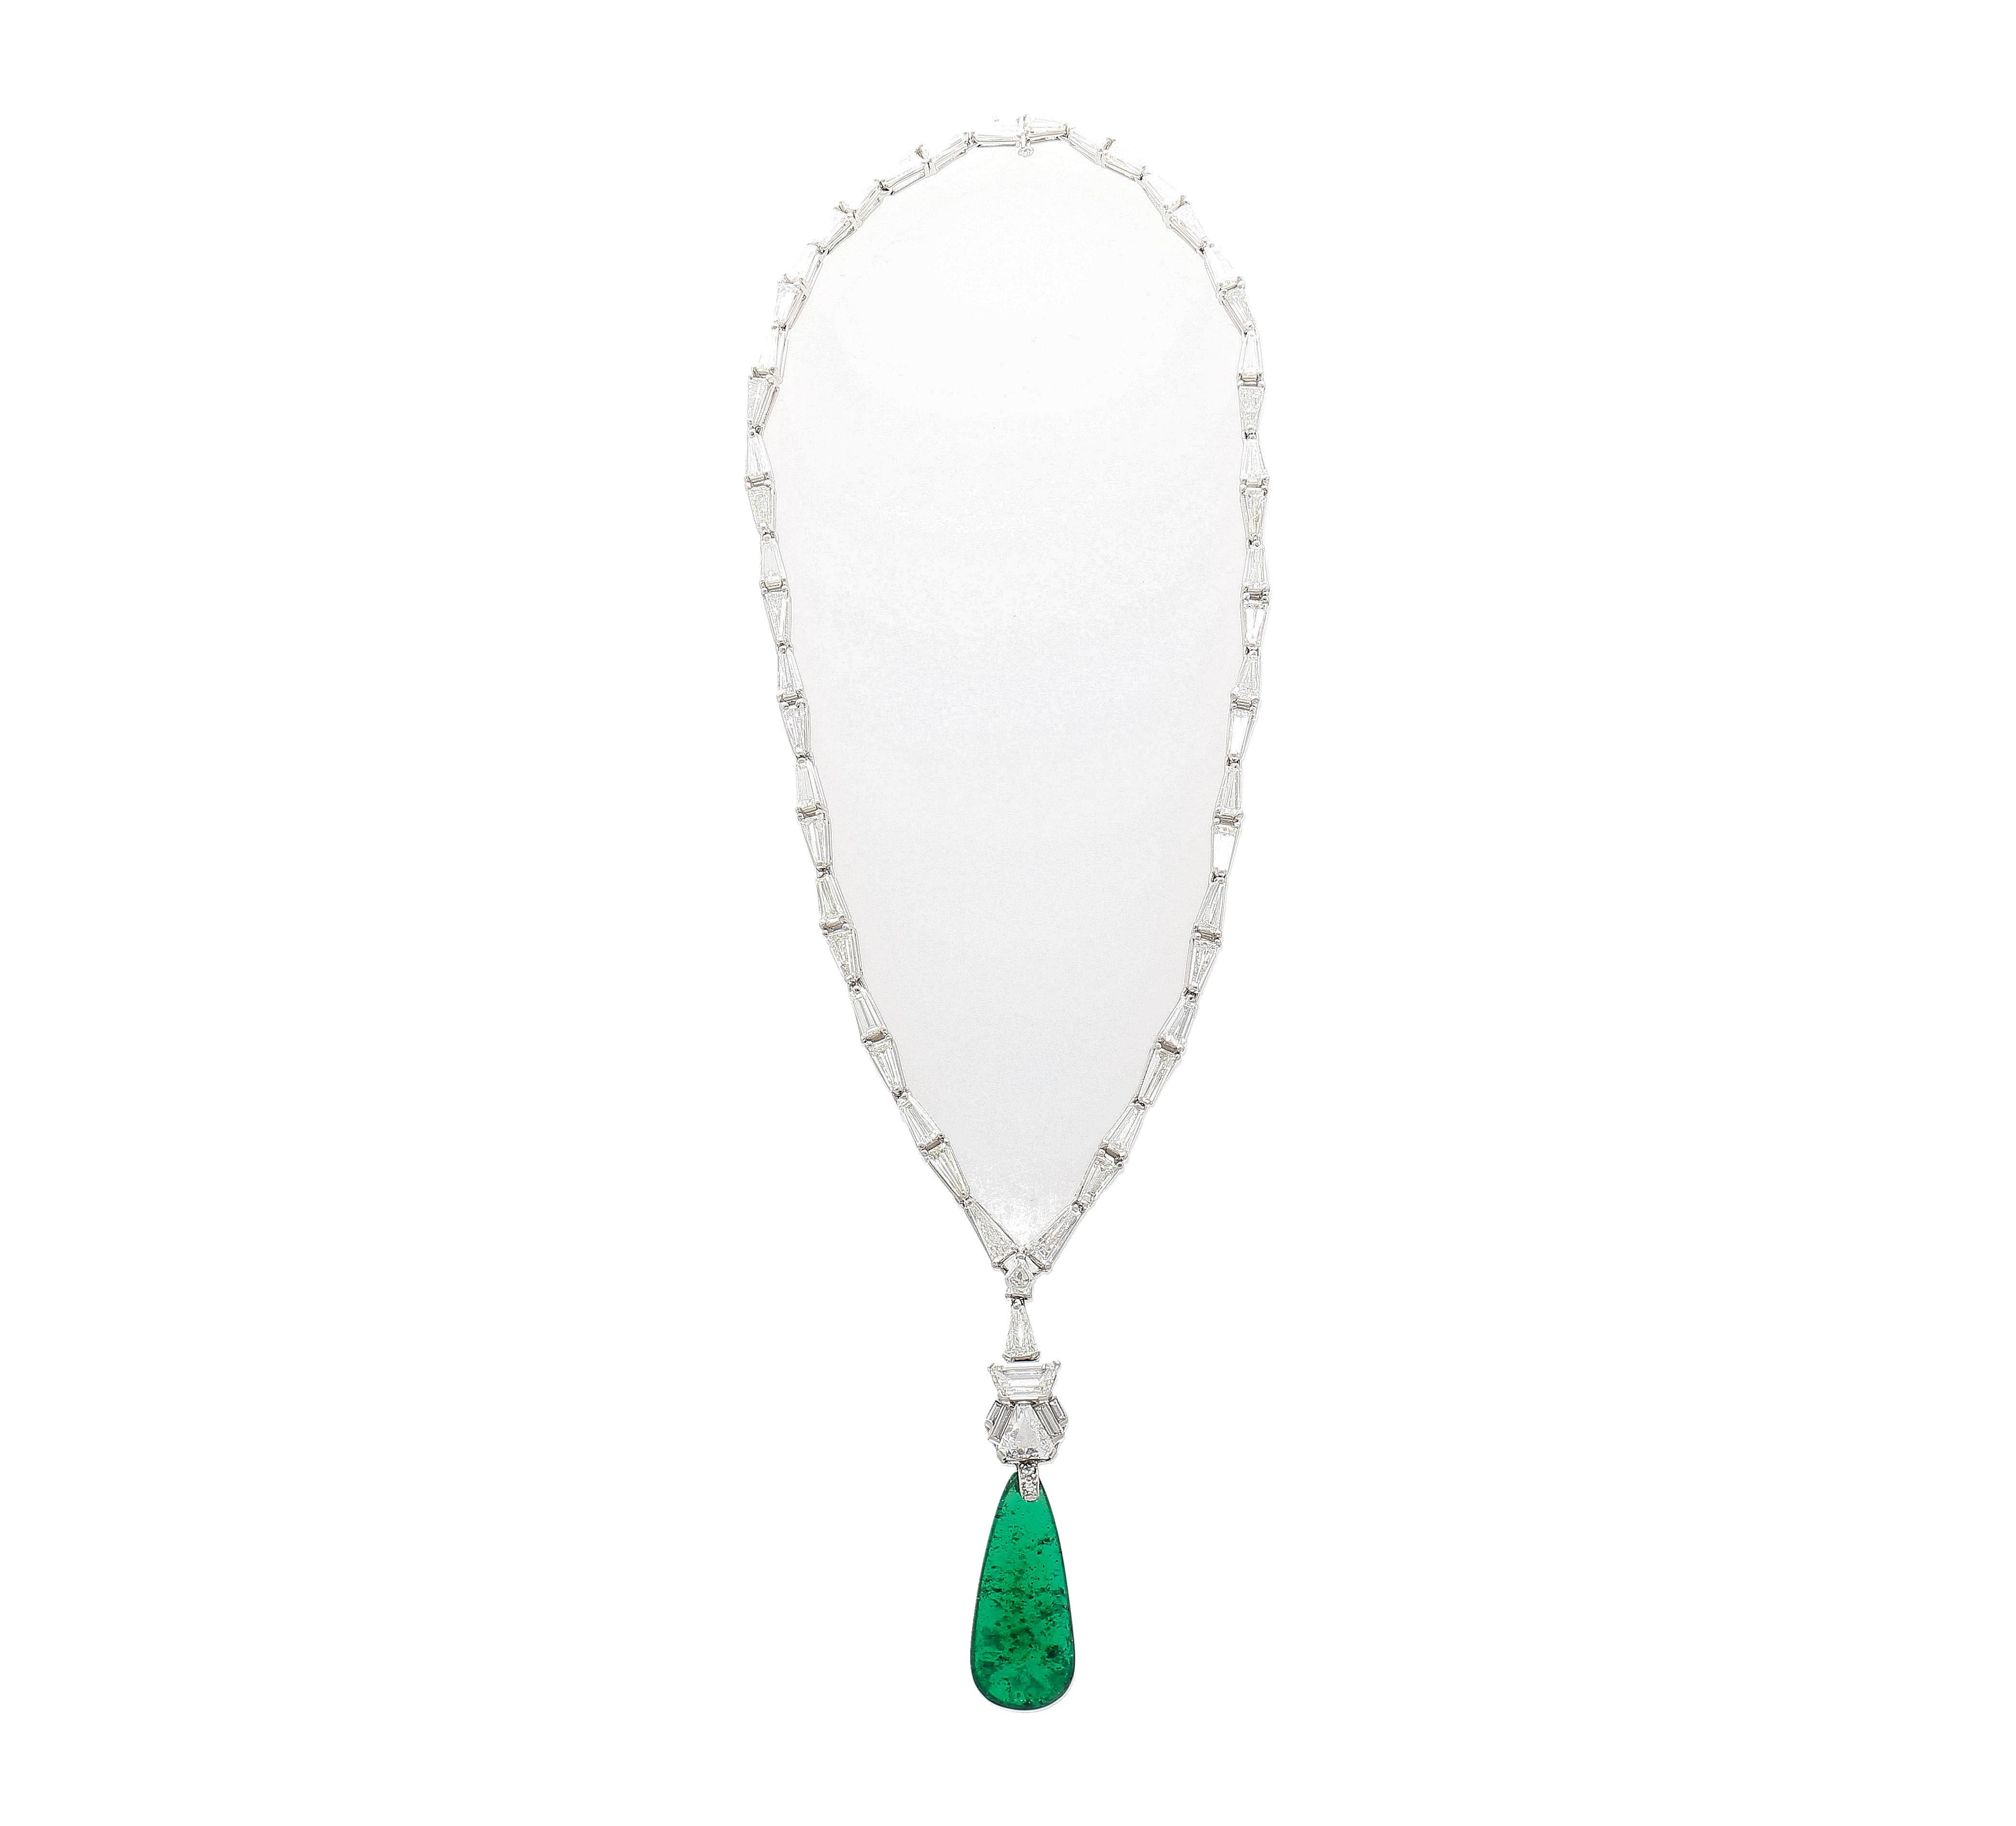 Explore timeless elegance with our 17-carat Colombian Emerald and Diamond Necklace in 18K gold. This exquisite piece showcases a captivating AGL-certified 17.04 carat Old Mine Drilled-Drop-Shape Colombian Emerald with insignificant oil treatment.